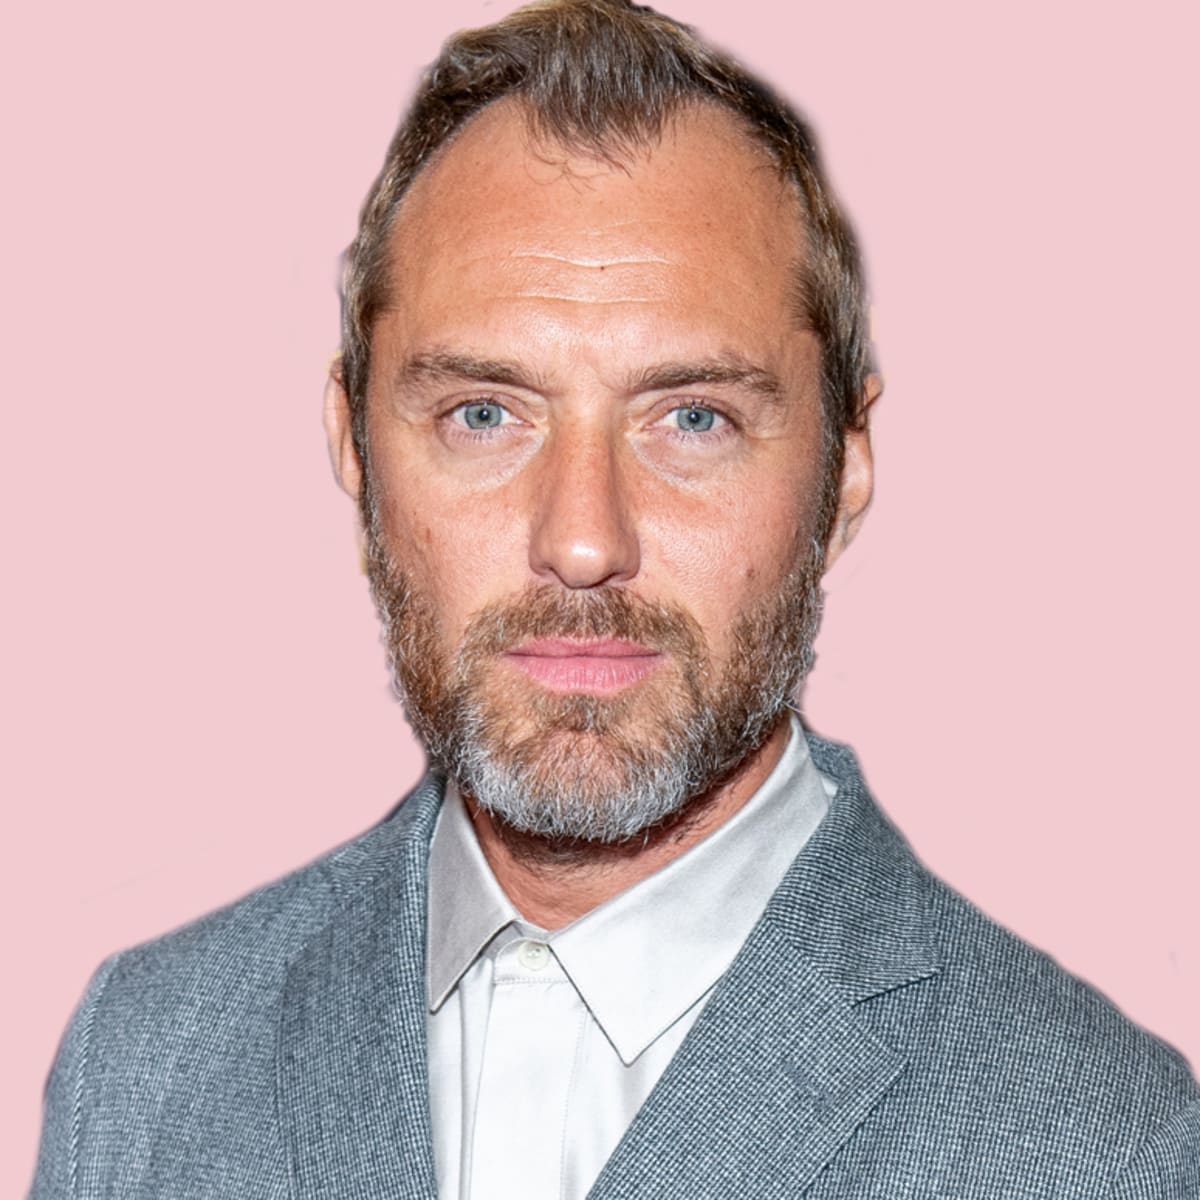 jude Law Drank 10 Cans Of Coke A Day To Gain Weight For A Role 12 Fun Facts About The Fantastic Beasts Star Parade Entertainment Recipes Health Life Holidays